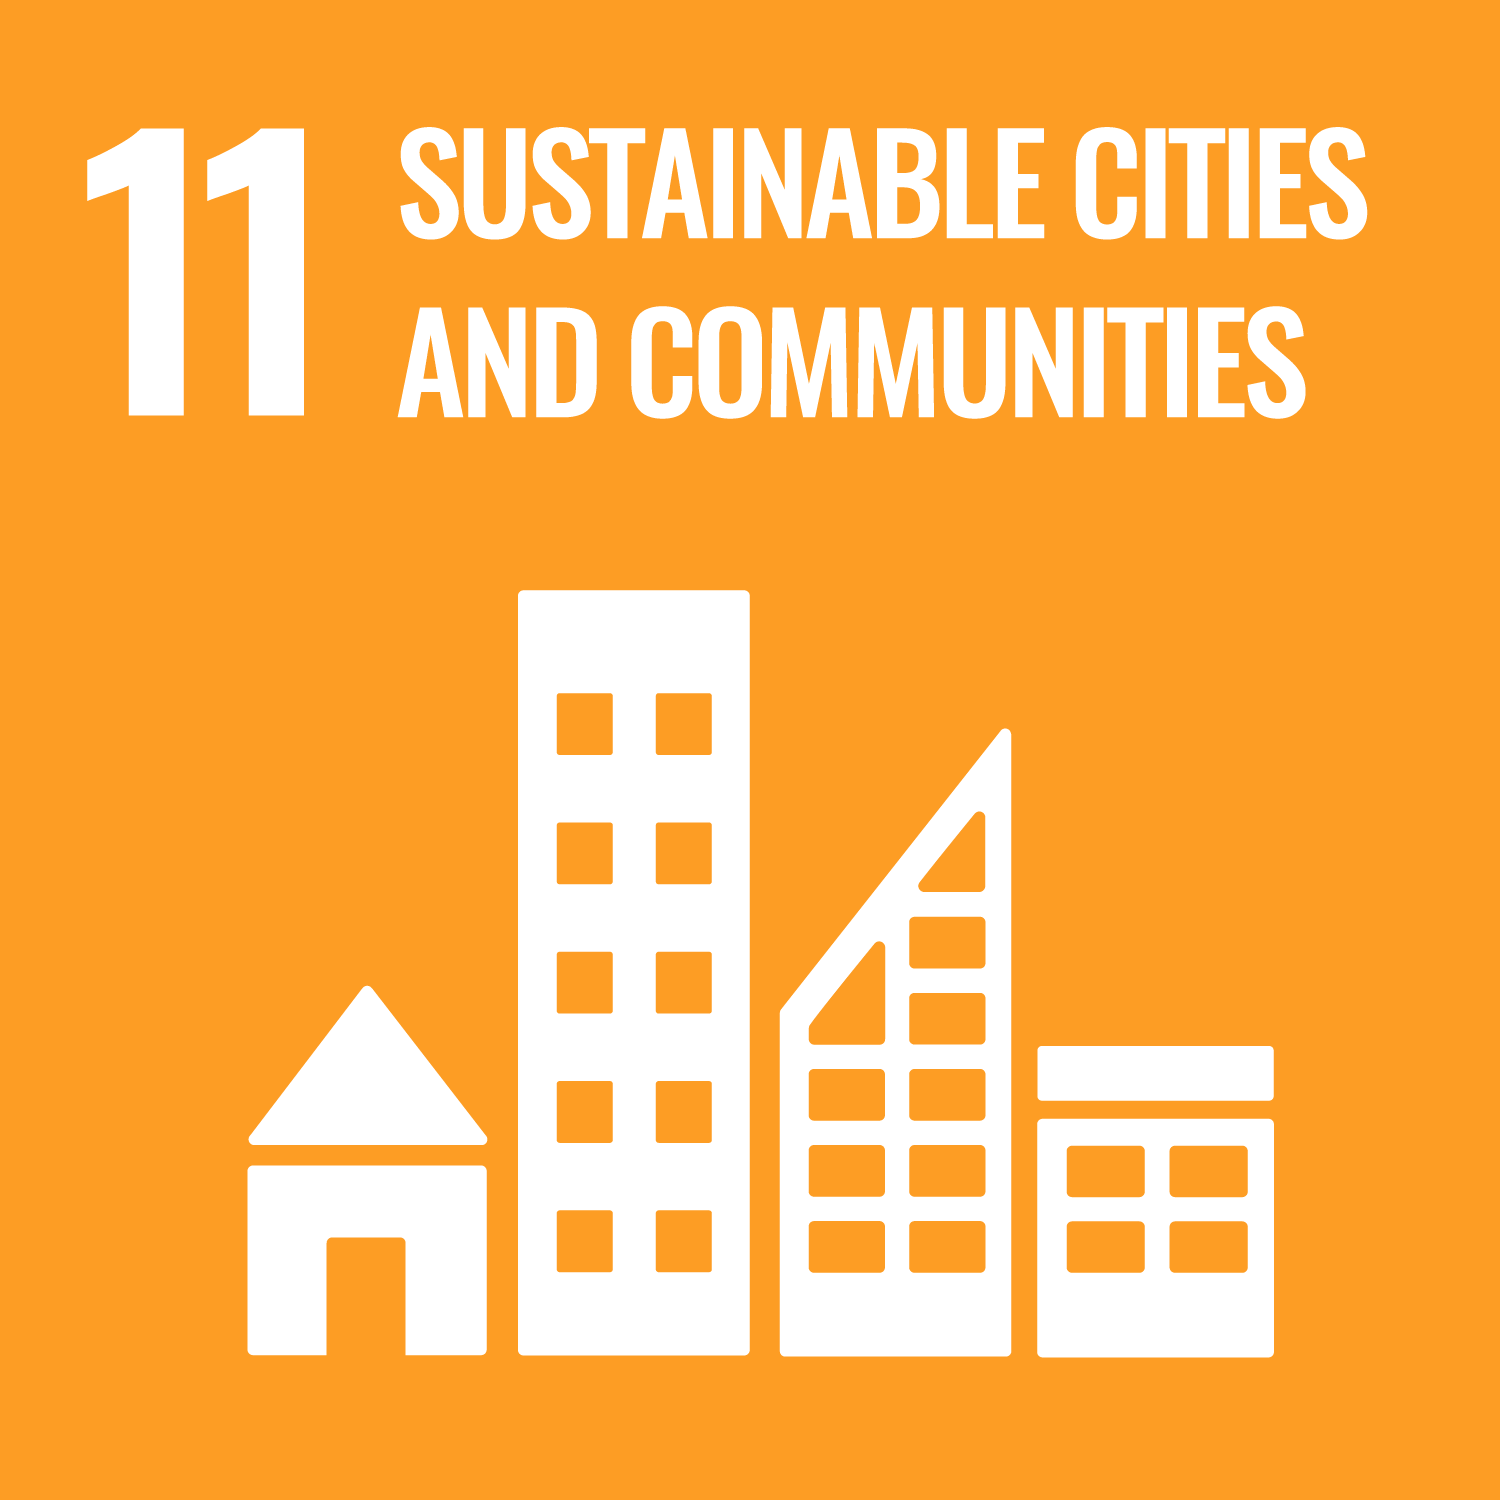 Related UN Sustainable Development Goals icon 6